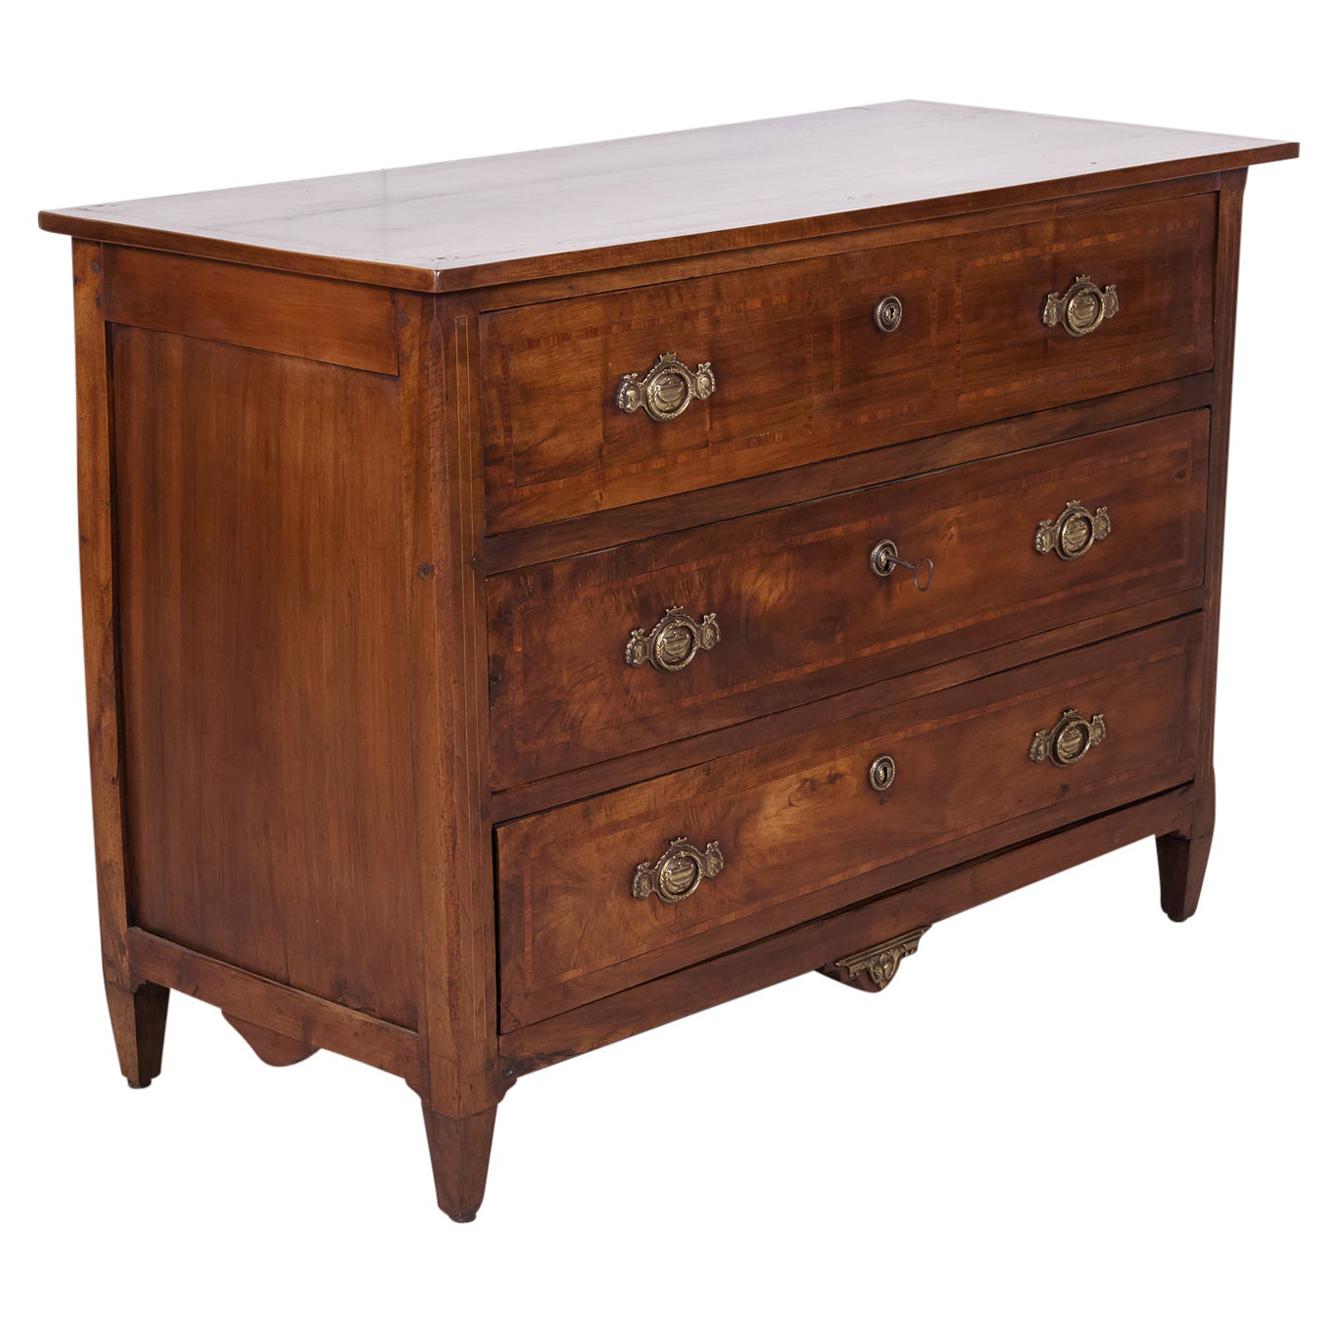 18th Century Period Louis XVI Walnut and Parquetry Commode